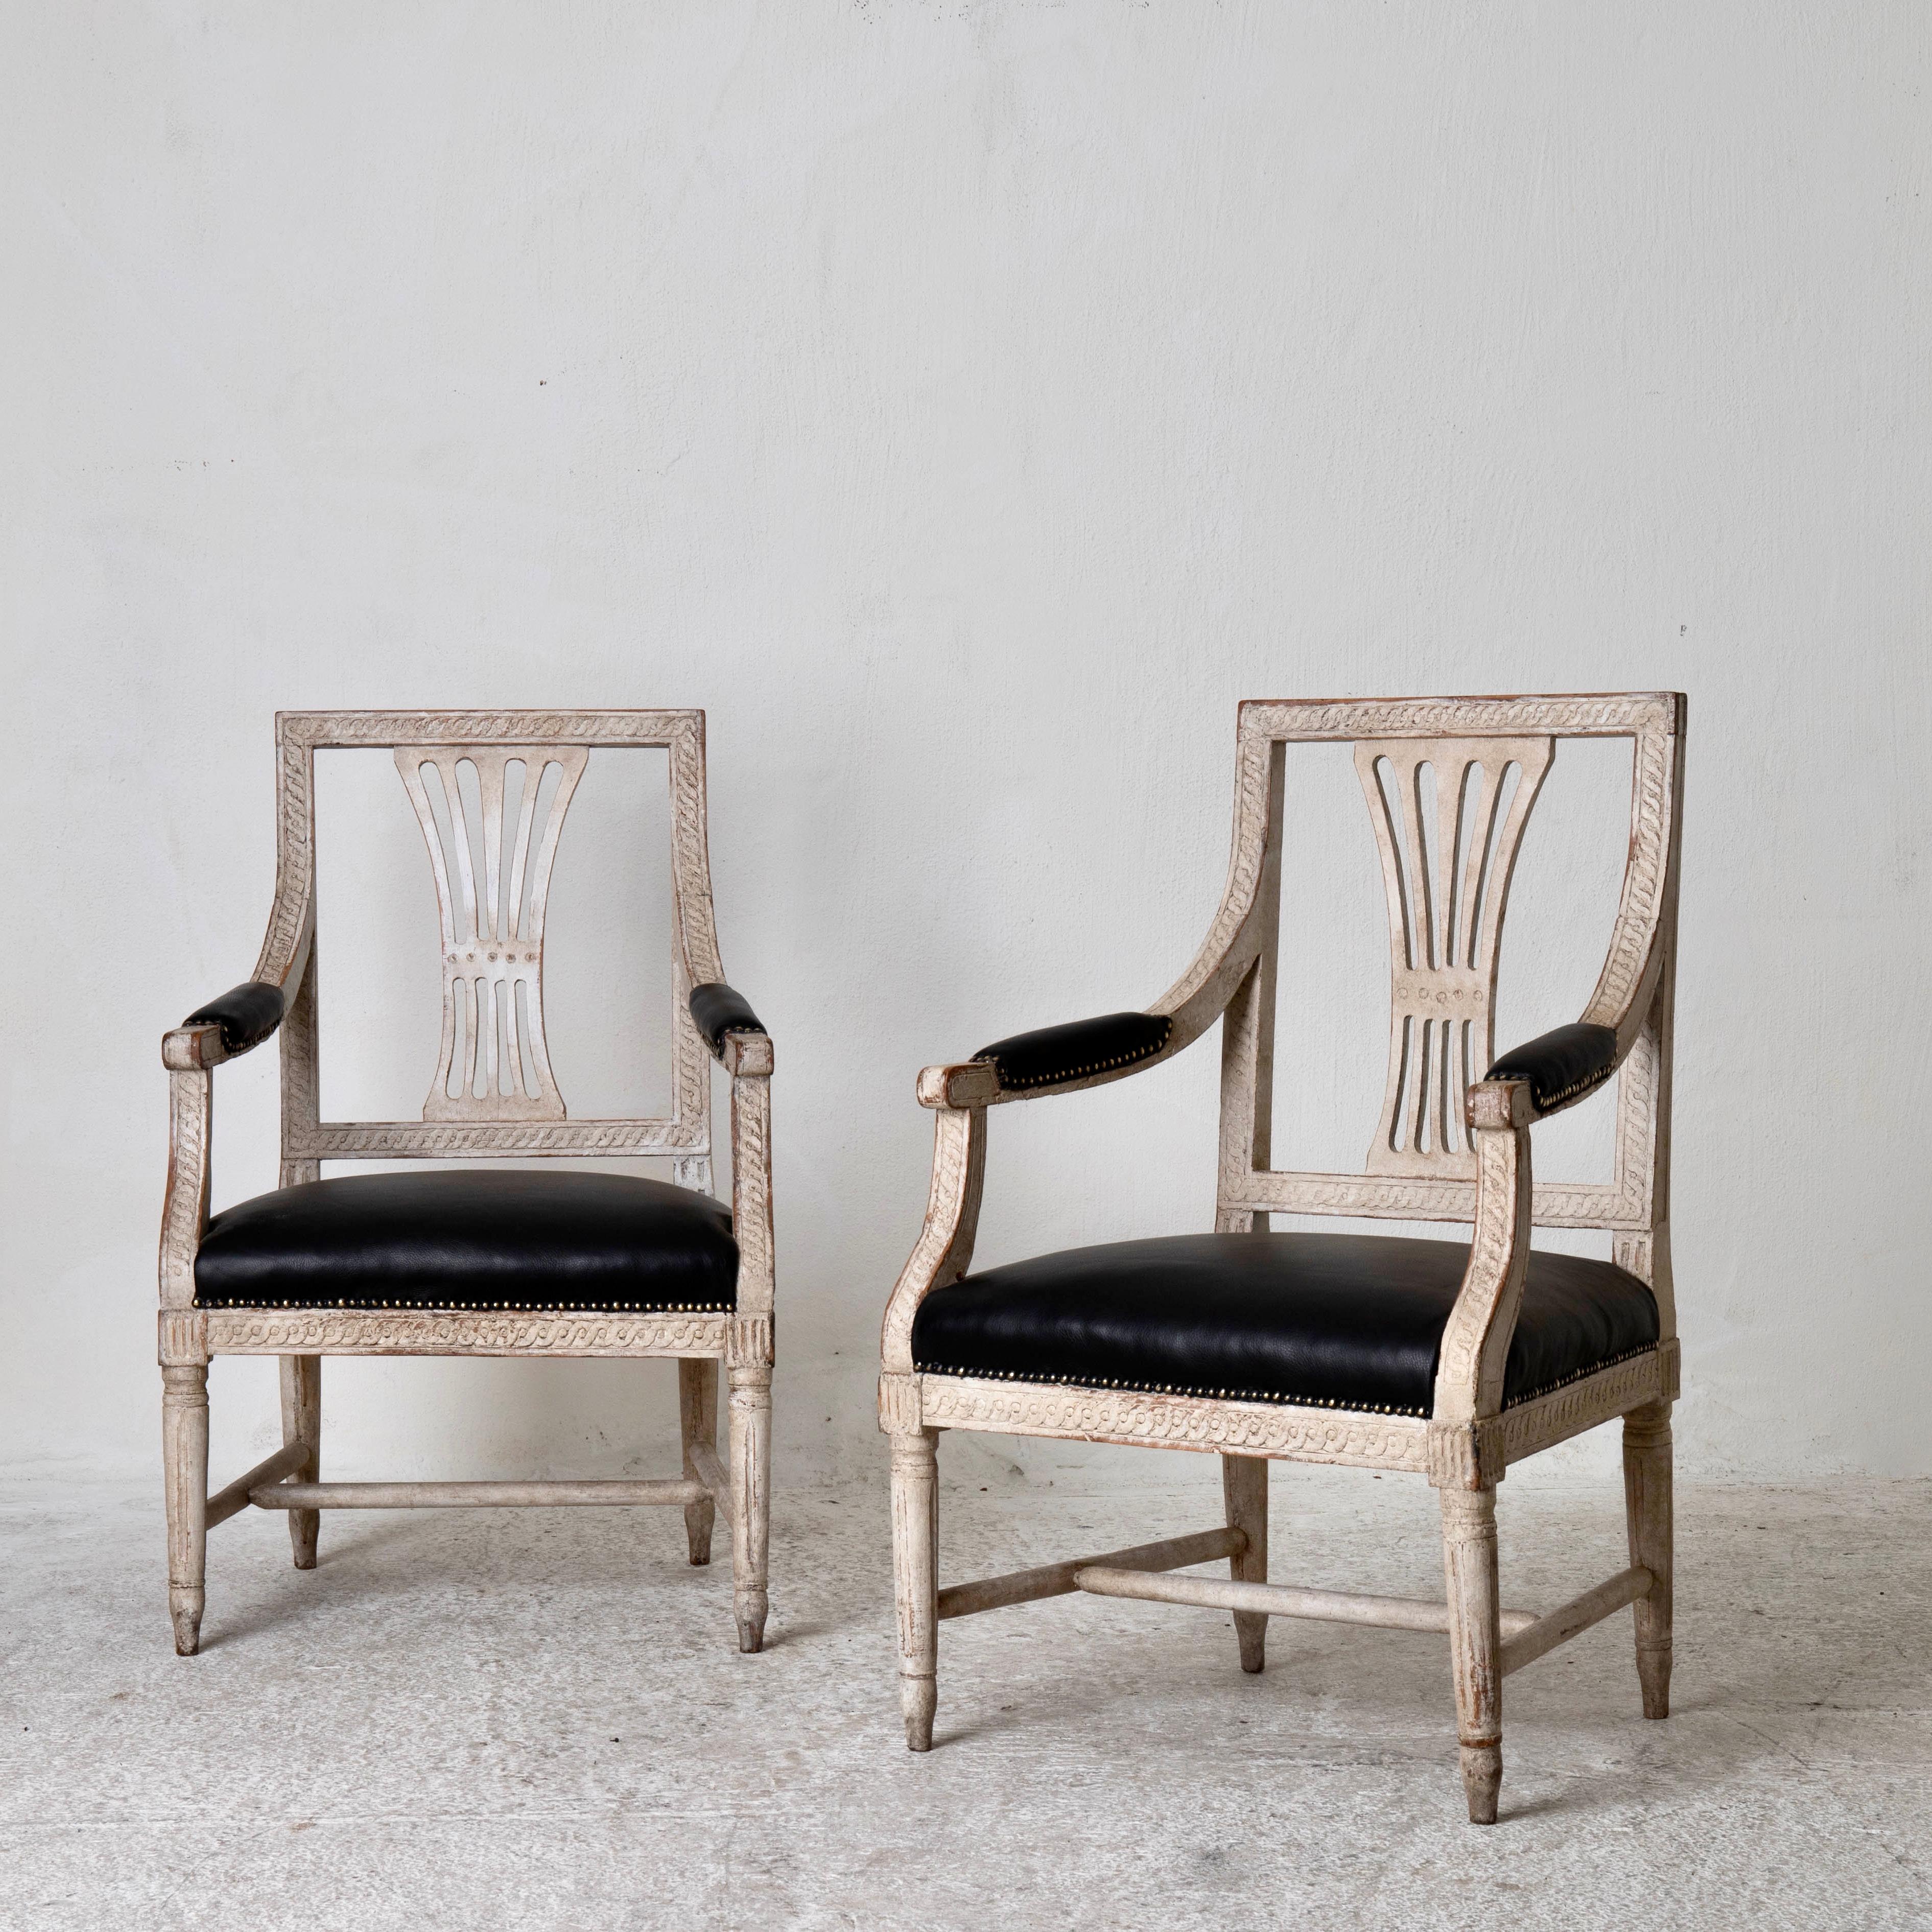 Armchairs Swedish Gustavian period white Sweden. A pair of armchairs made during the Gustavian period in Sweden. Distressed white finish and upholstered in a black leather, Armrests semi upholstered, Frame carved with a ribbon and rounded legs